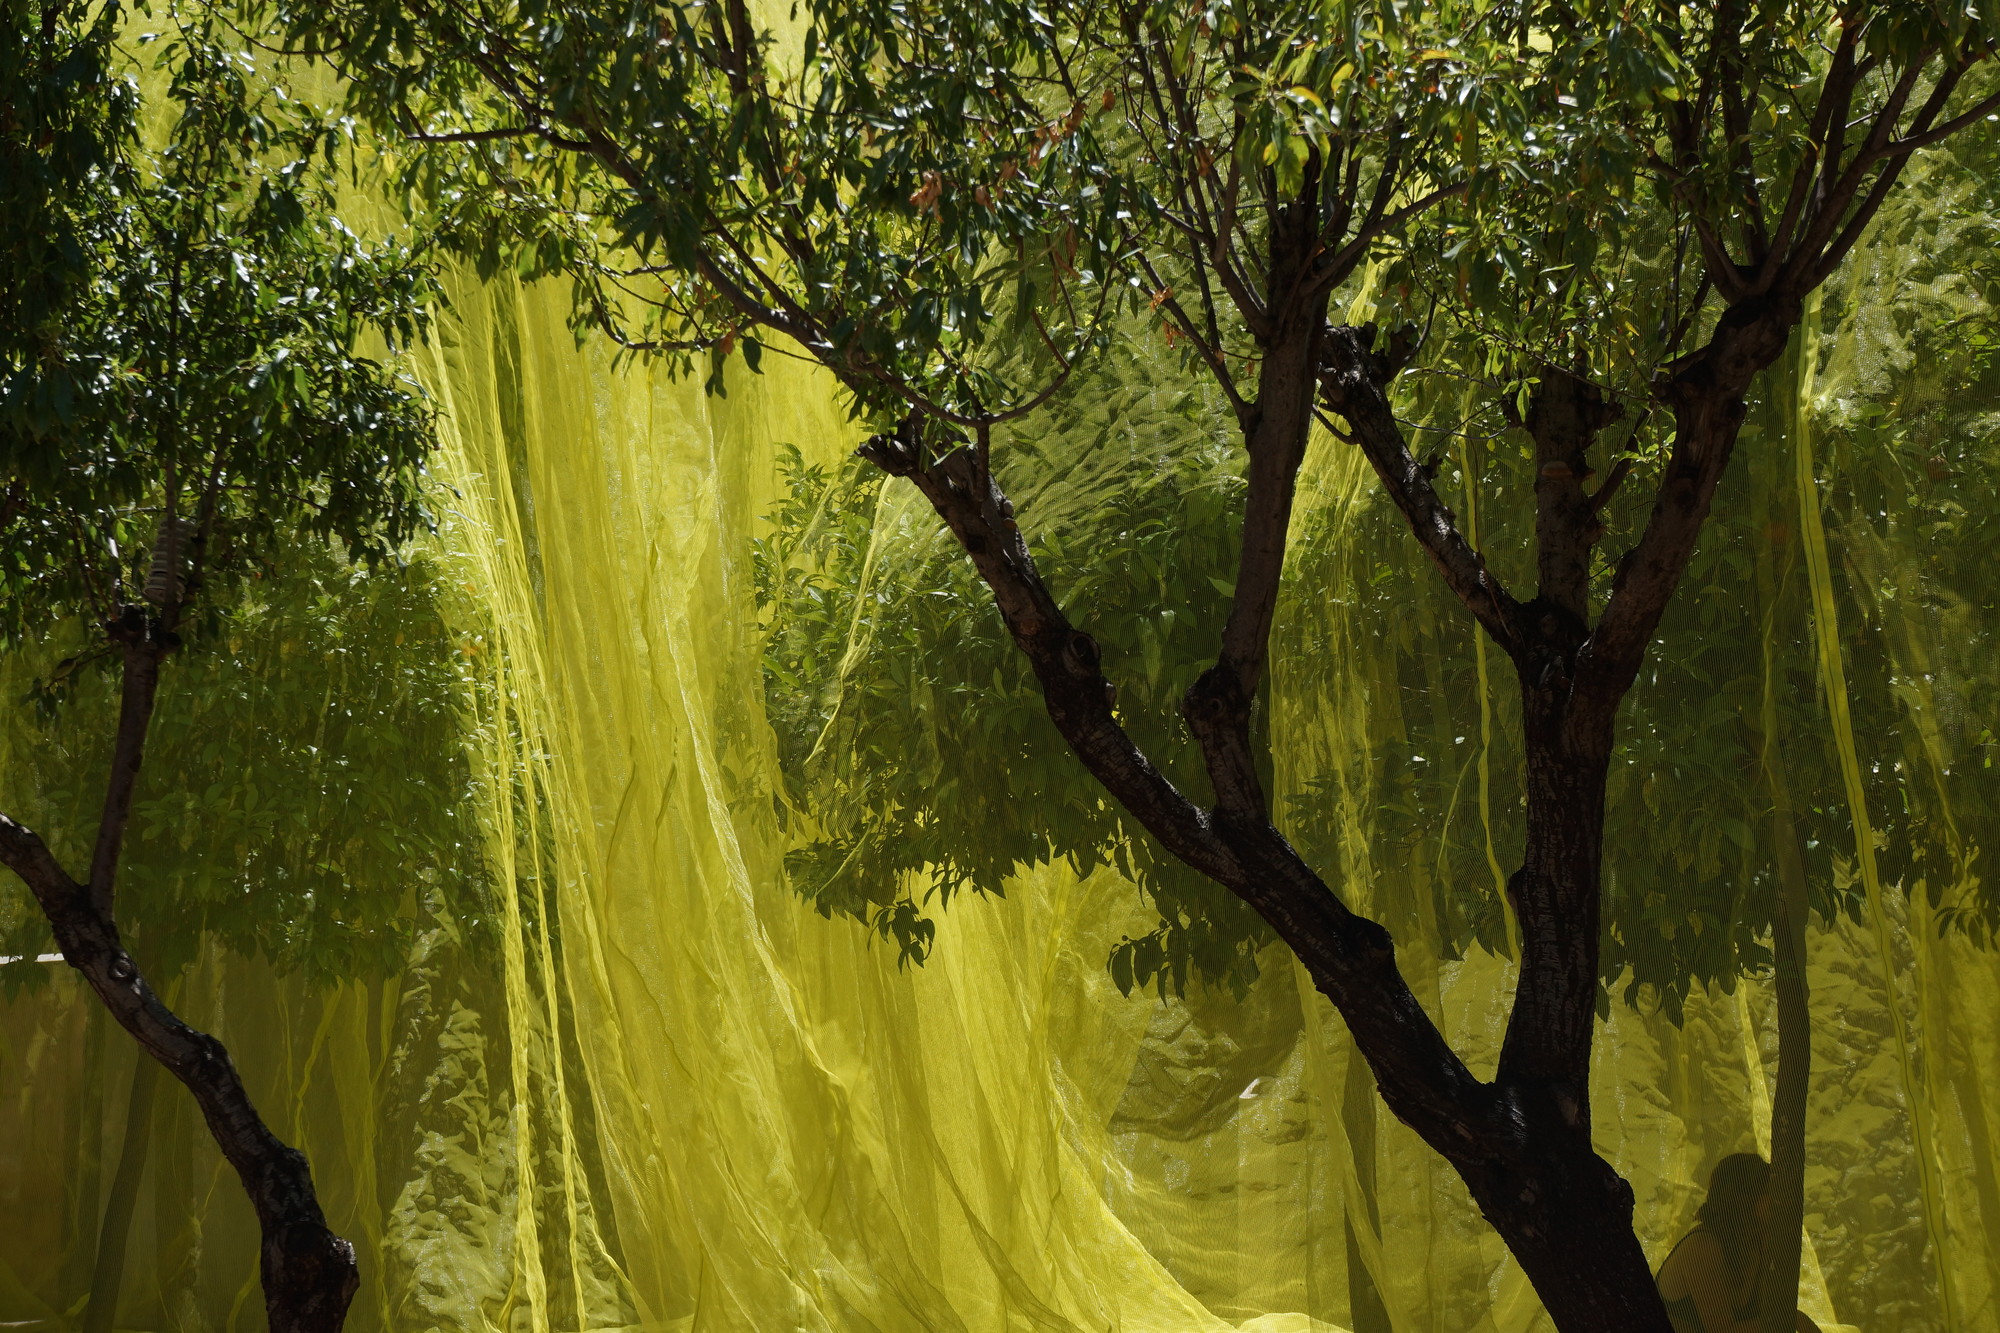 Lime green plastic netting is hung amidst trees with green leaves.